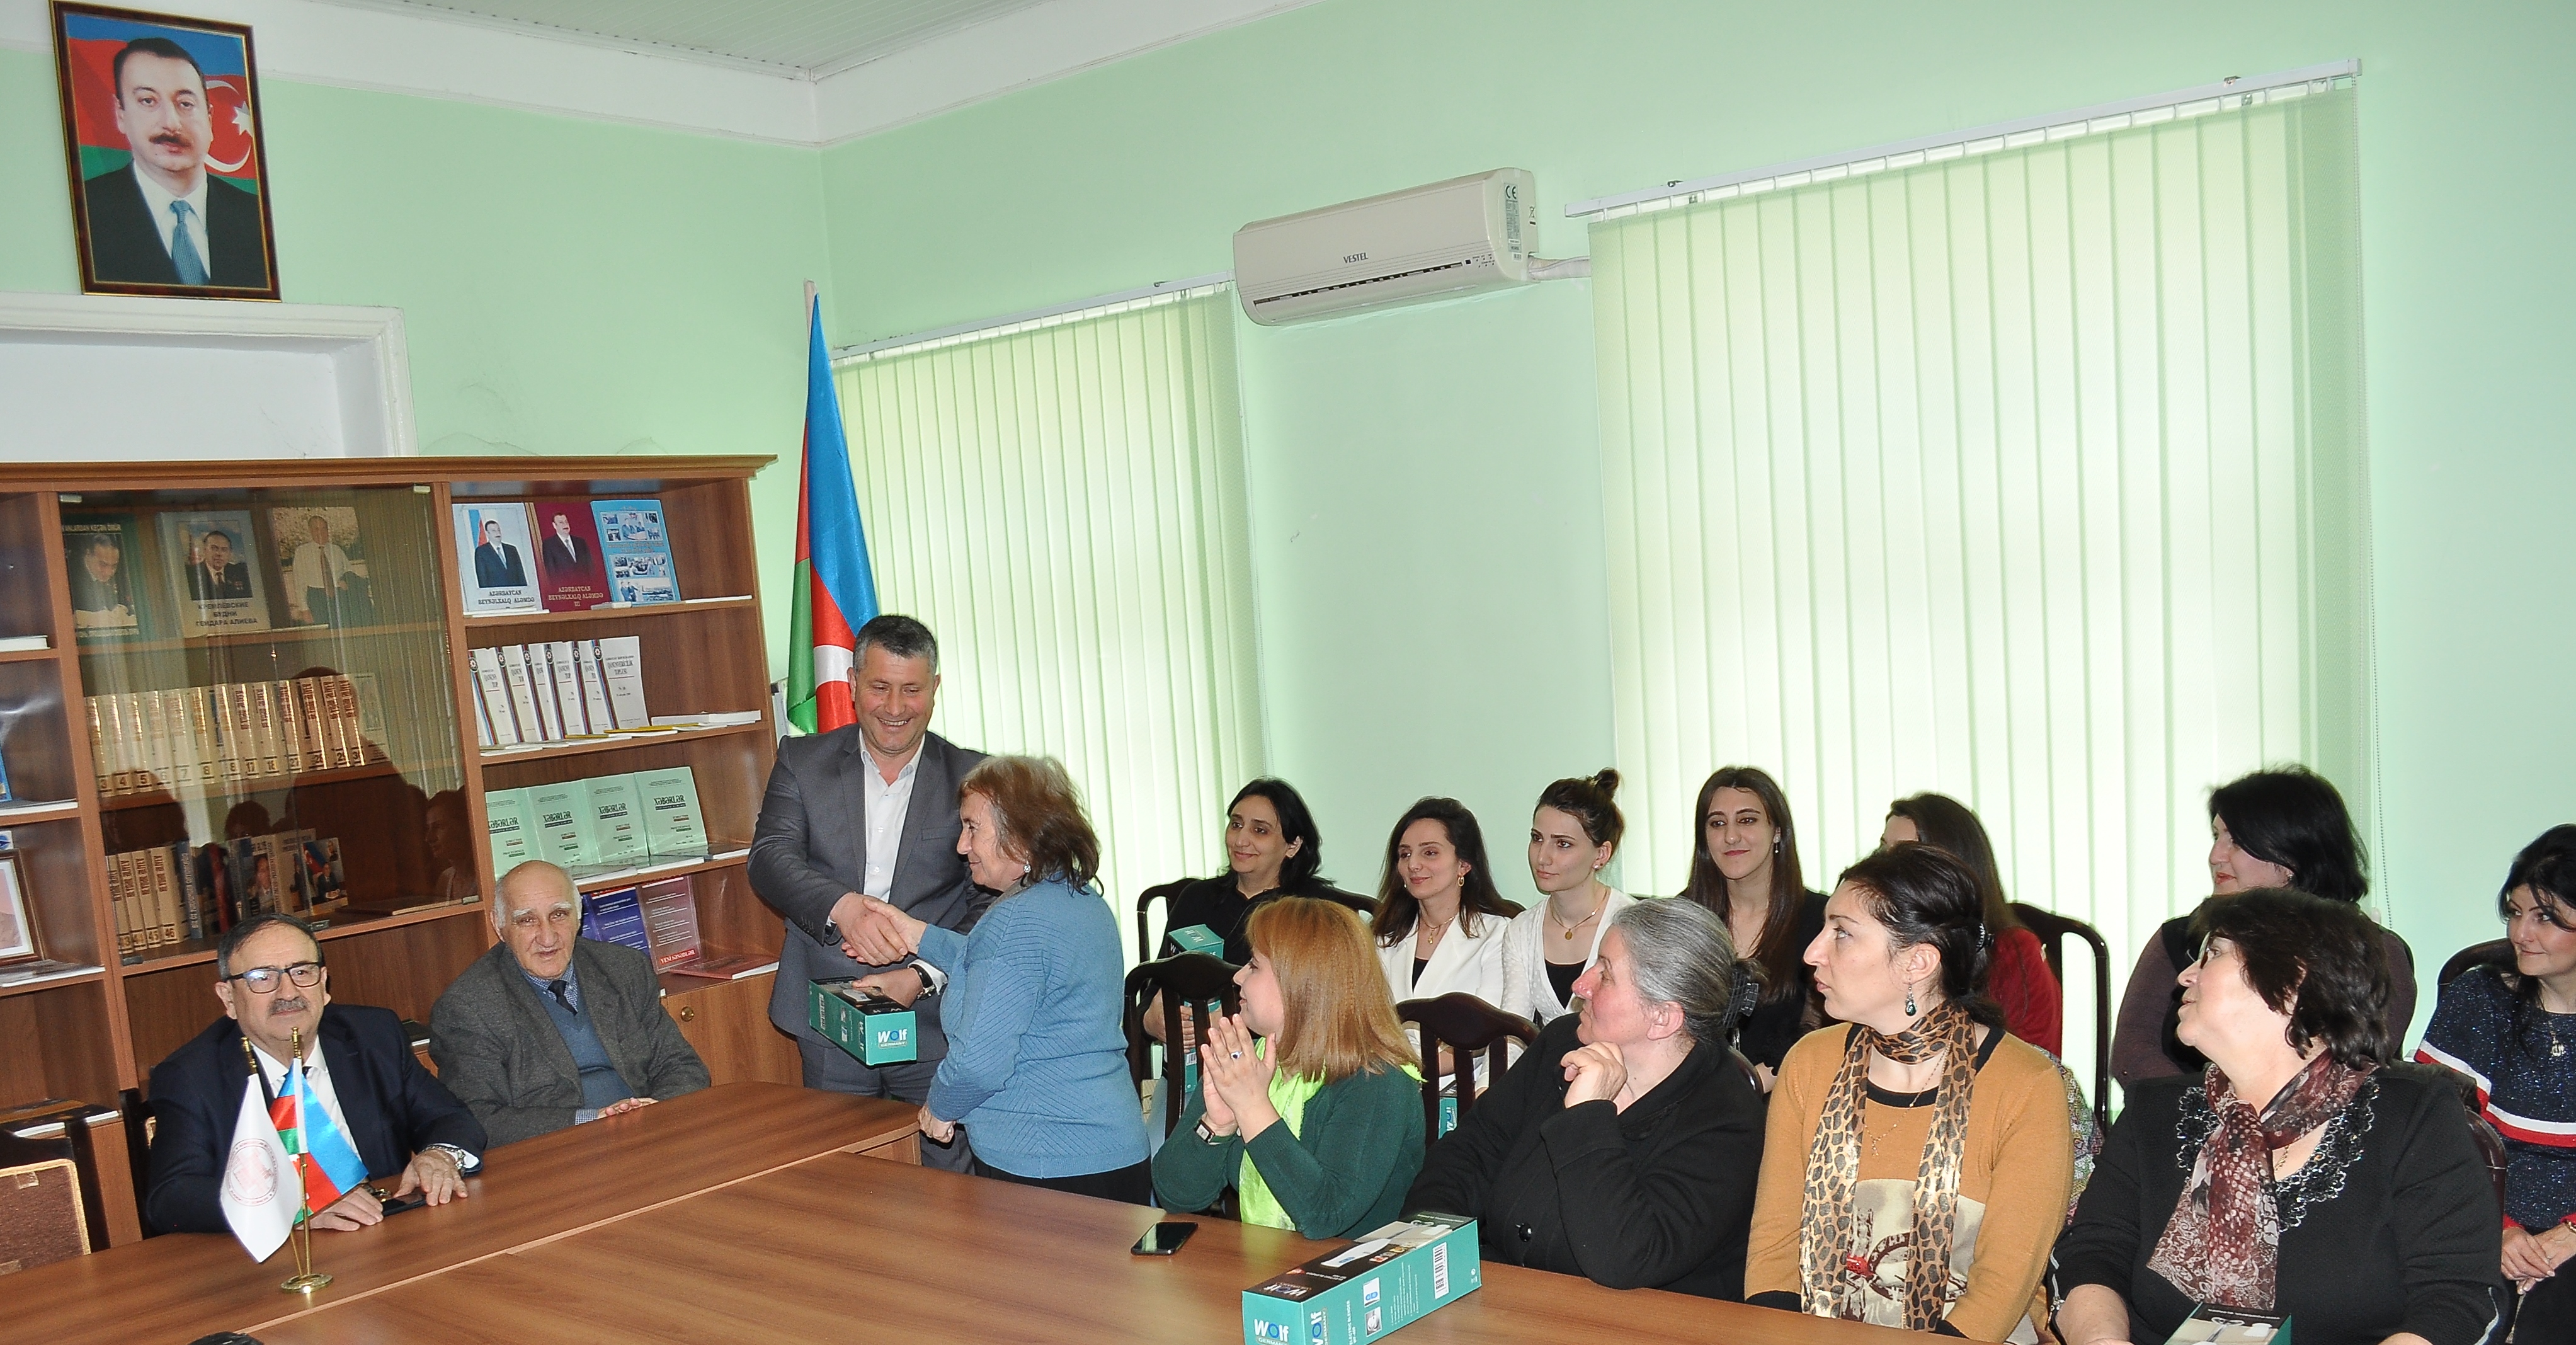 On March 06, 2020 the ceremony dedicated to International Women's Day was held by Trade Union of Sheki Regional Scientific Center